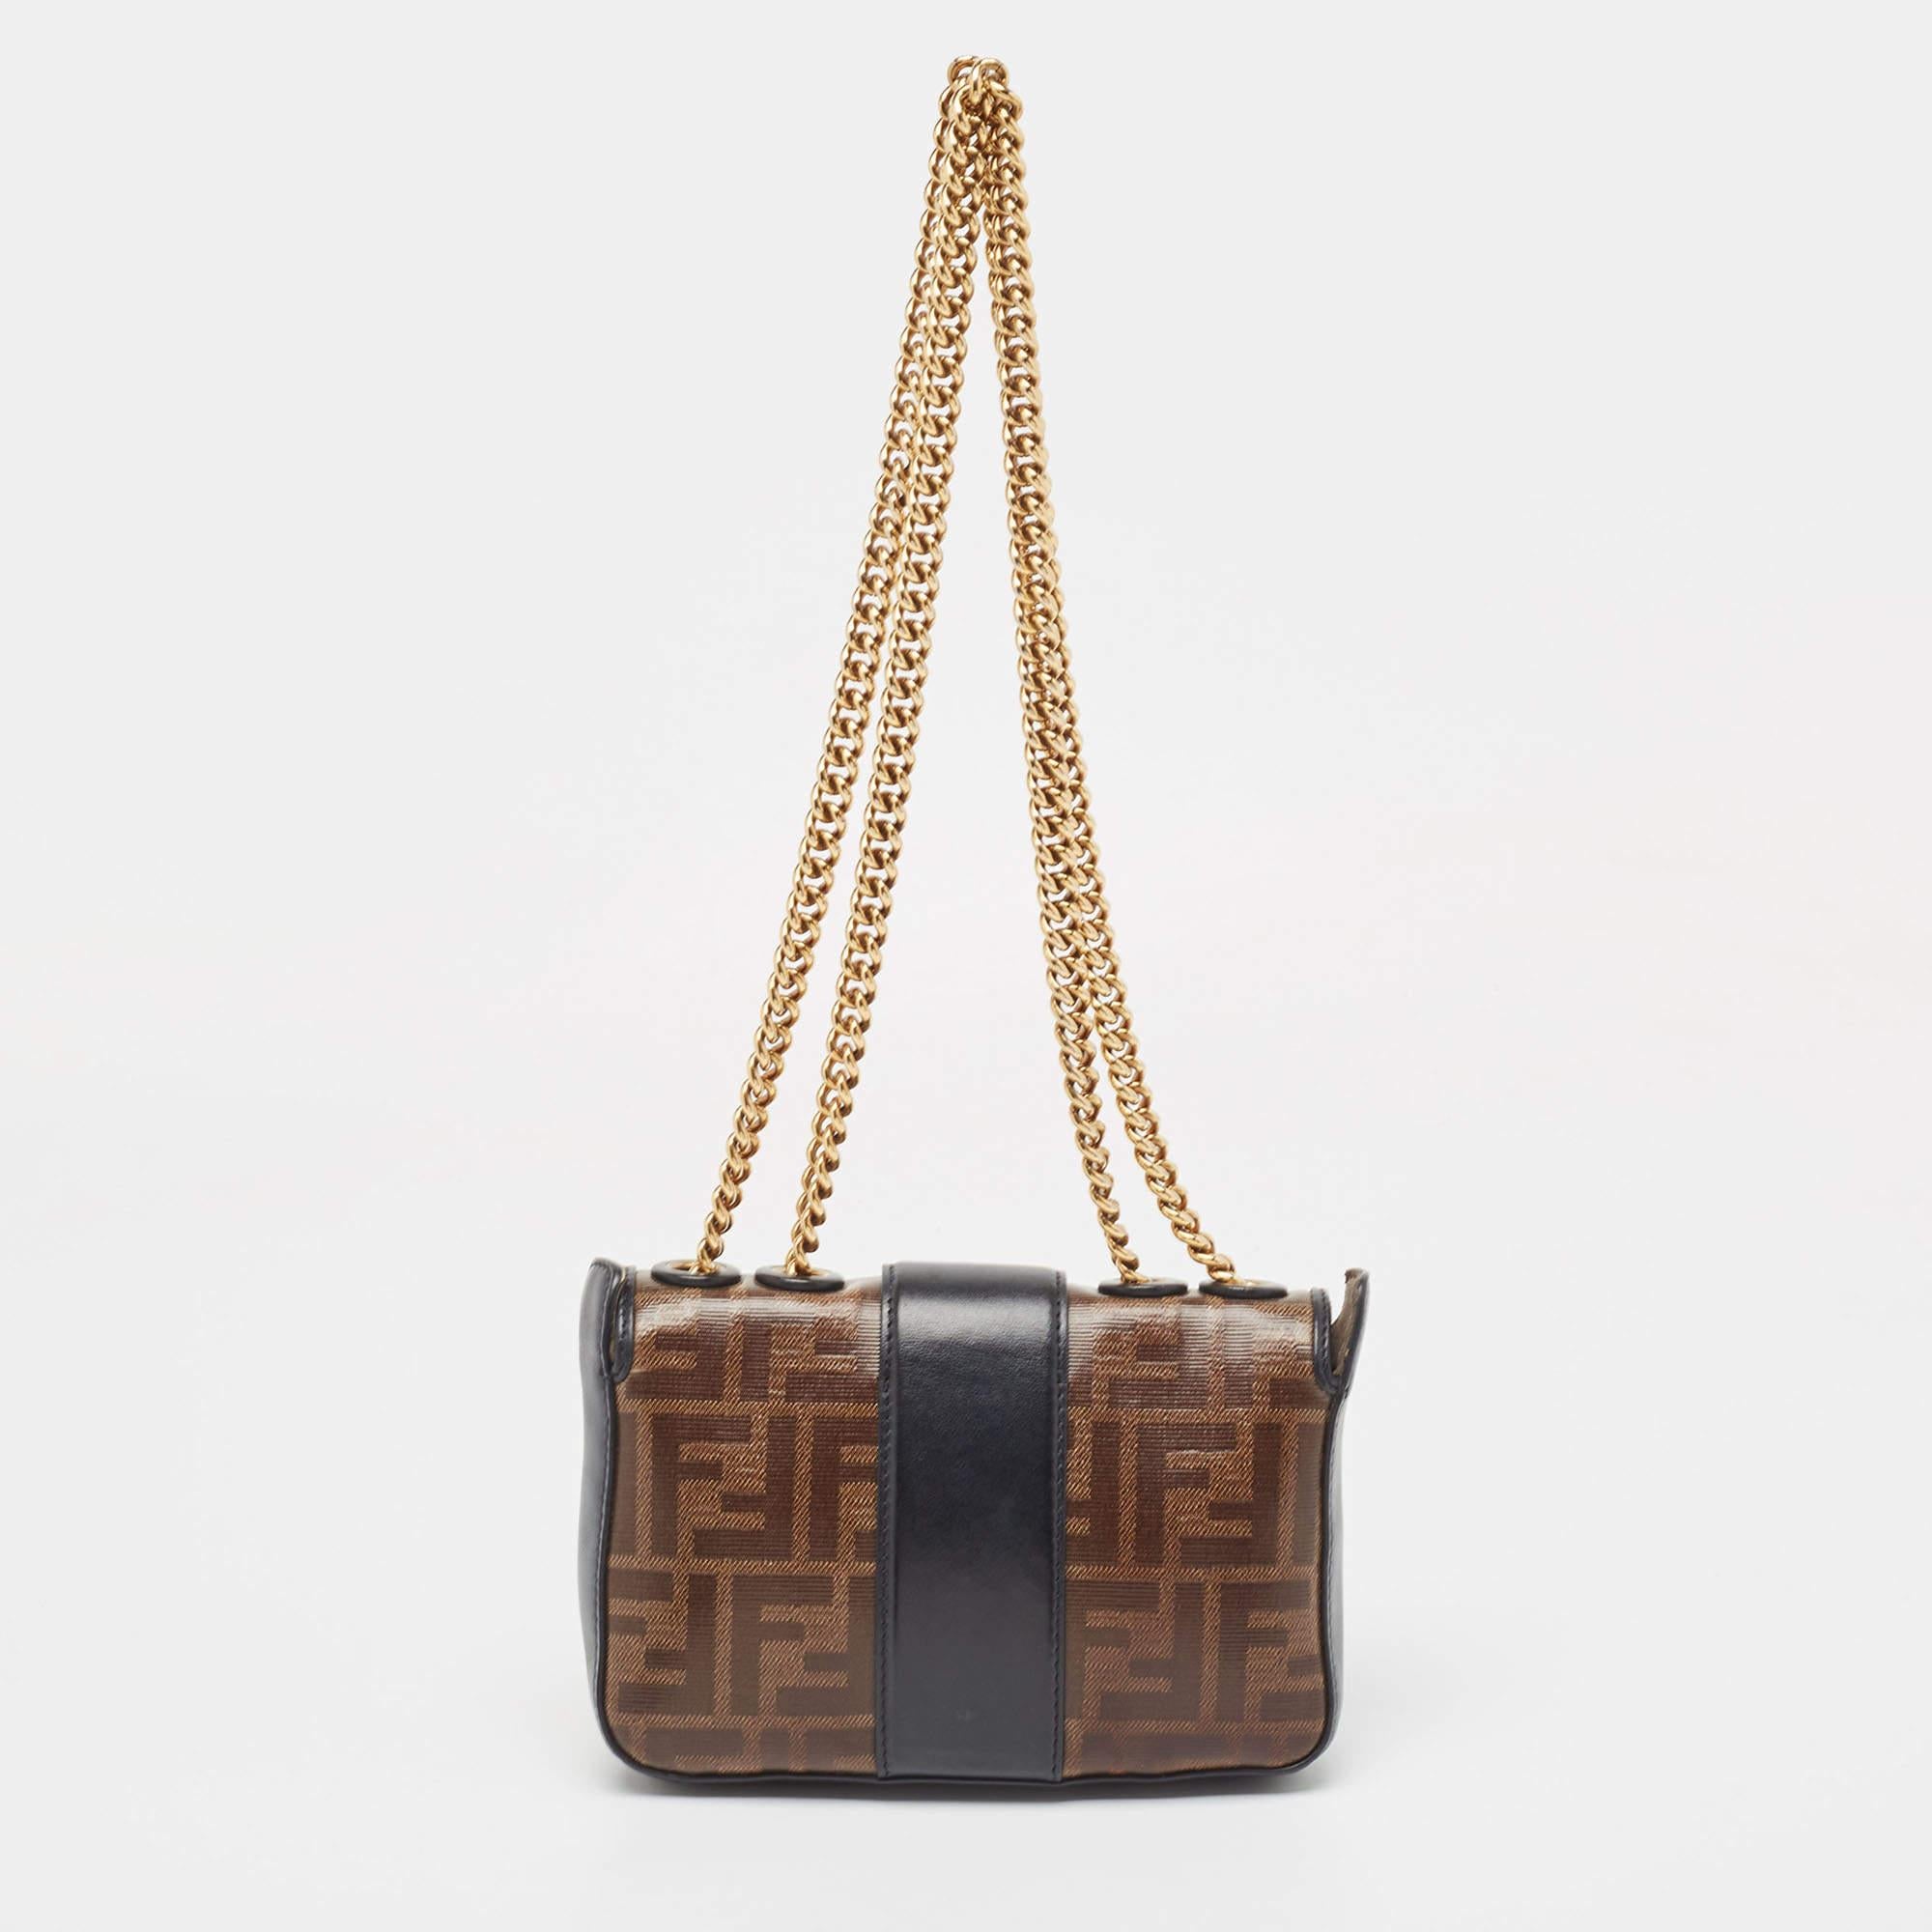 Imbued with signature elements, this Fendi Mini 1974 bag will be a valuable addition to your closet. The usage of the Zucca coated canvas in the construction and the addition of a branded accent on the front flap give a luxurious look.

Includes: